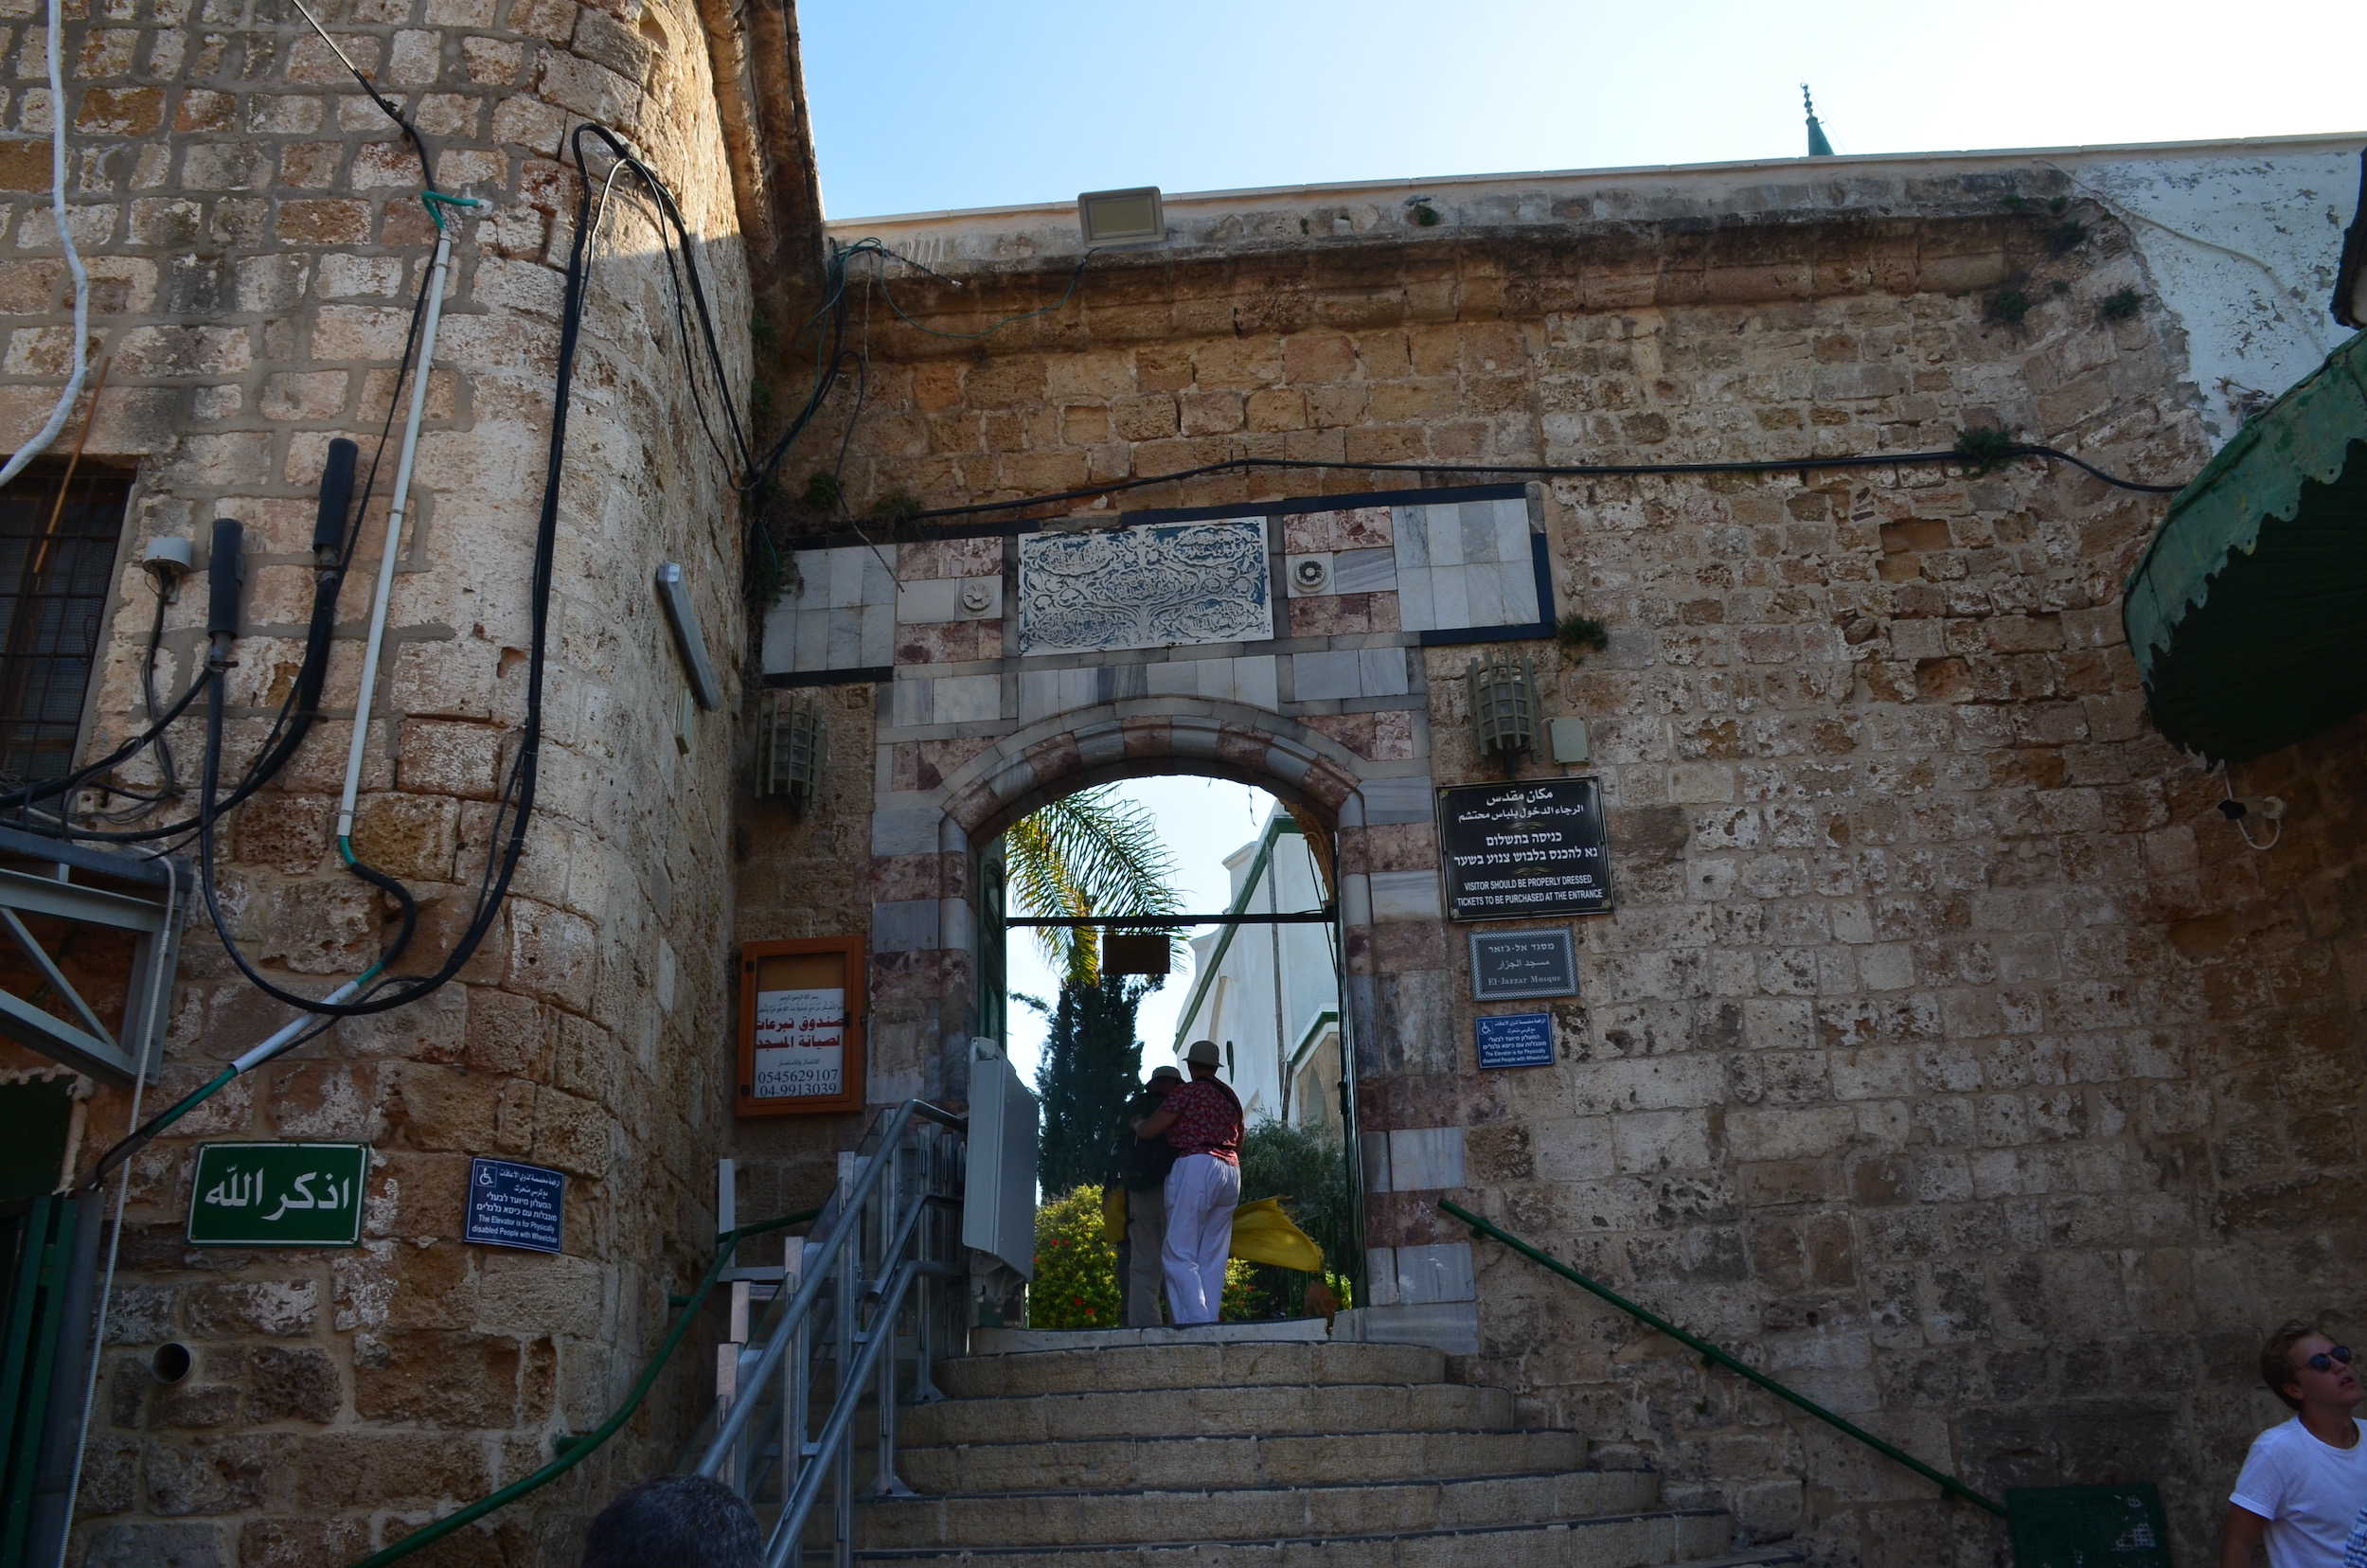 Entrance to the al-Jazzar Mosque complex in Acre, Israel